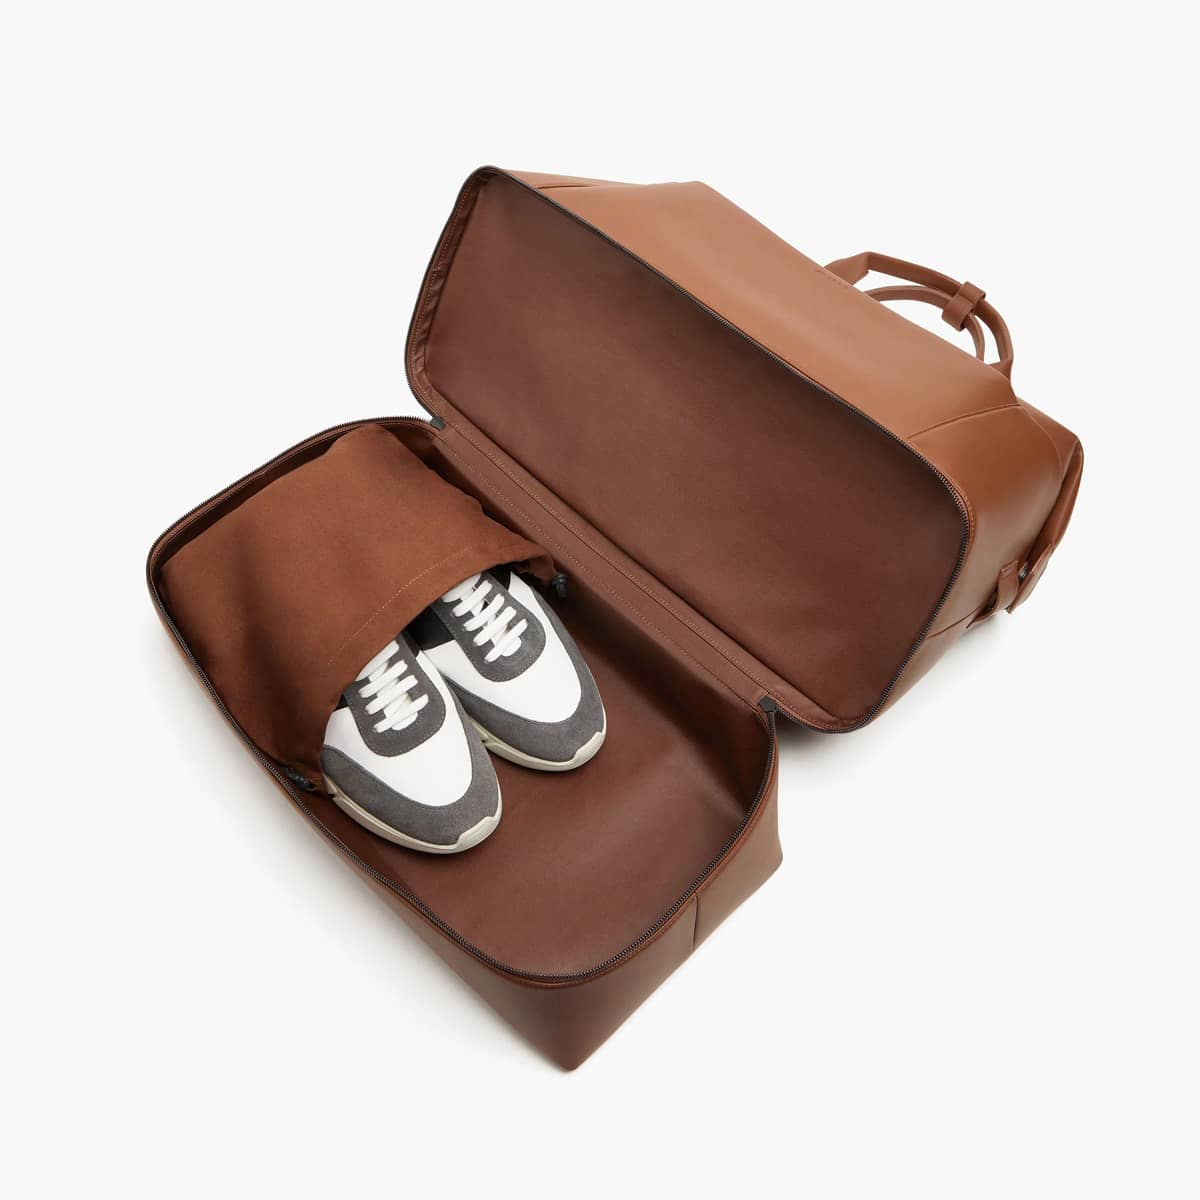 Weekender bag with shoe compartment